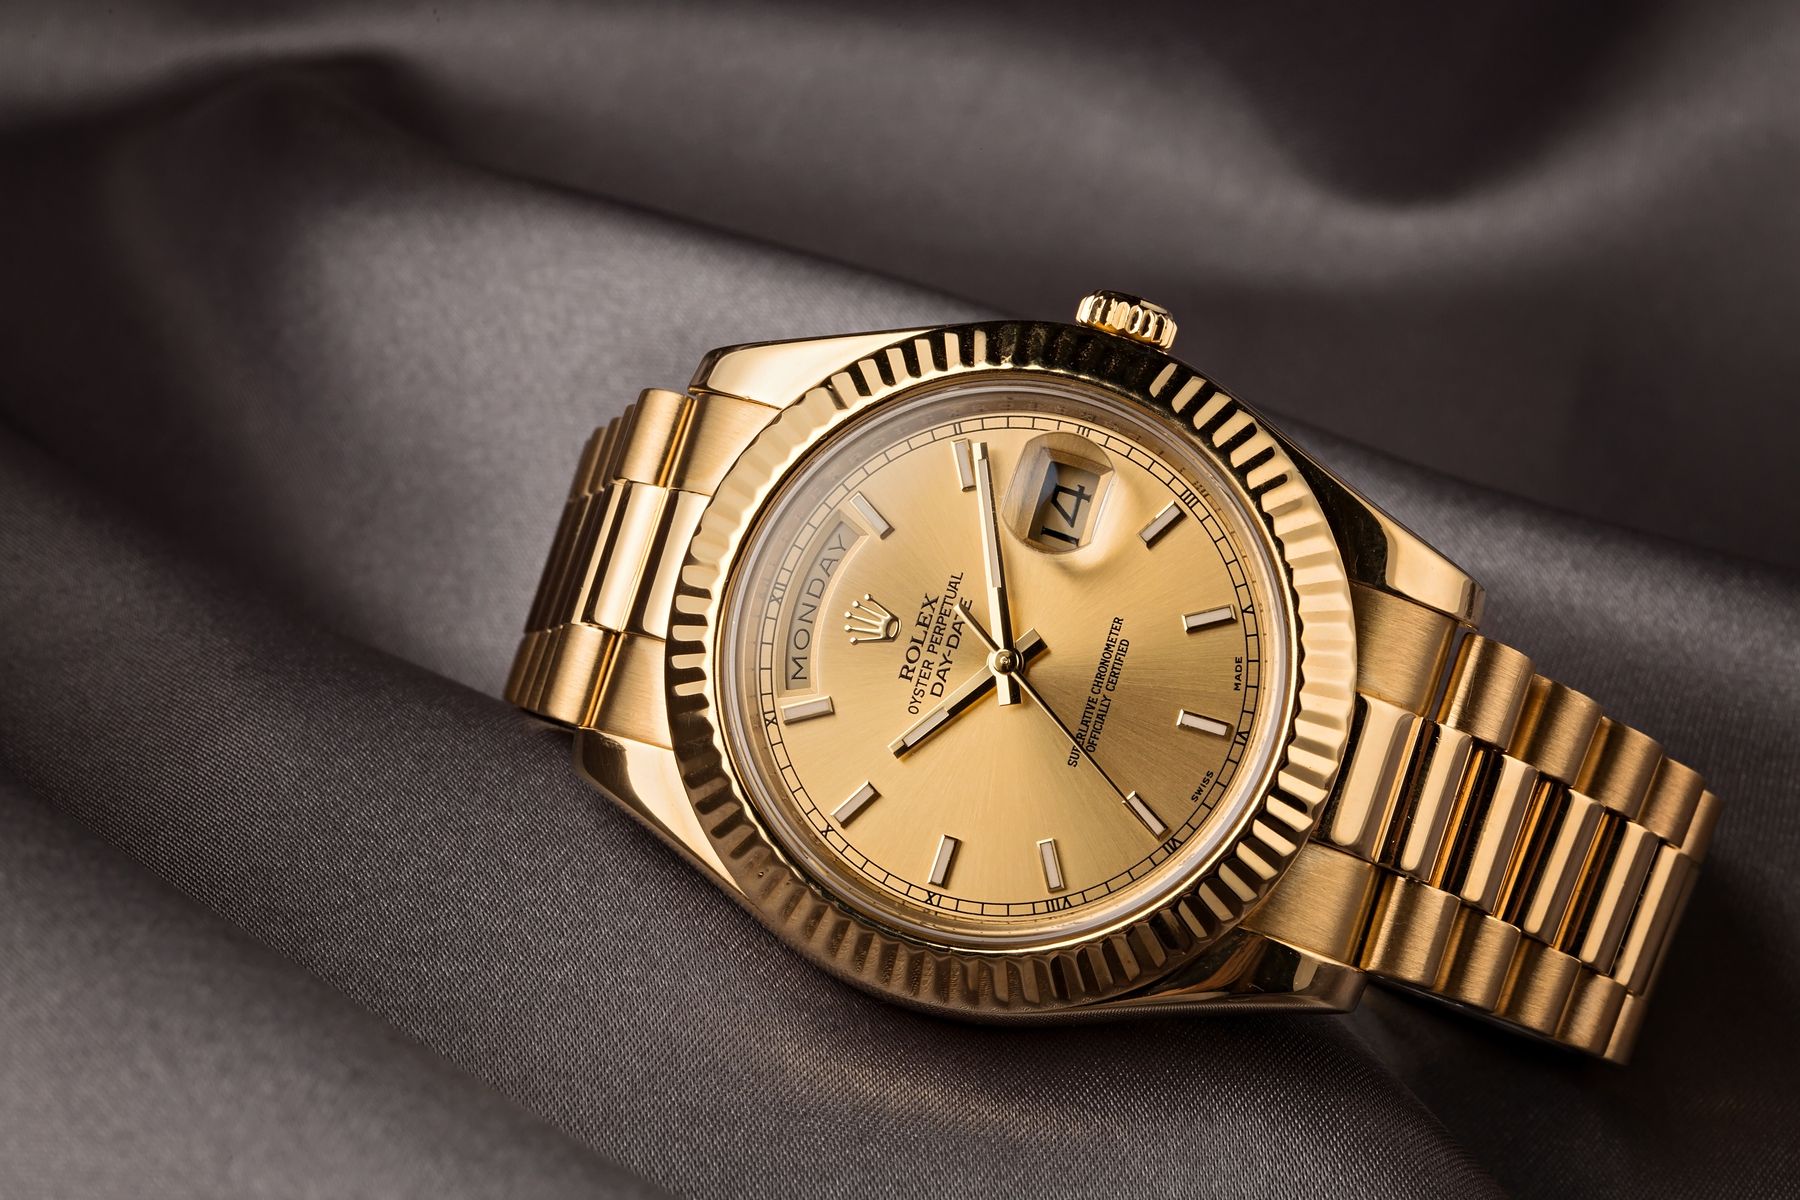 Rolex Day-Date President Yellow Gold